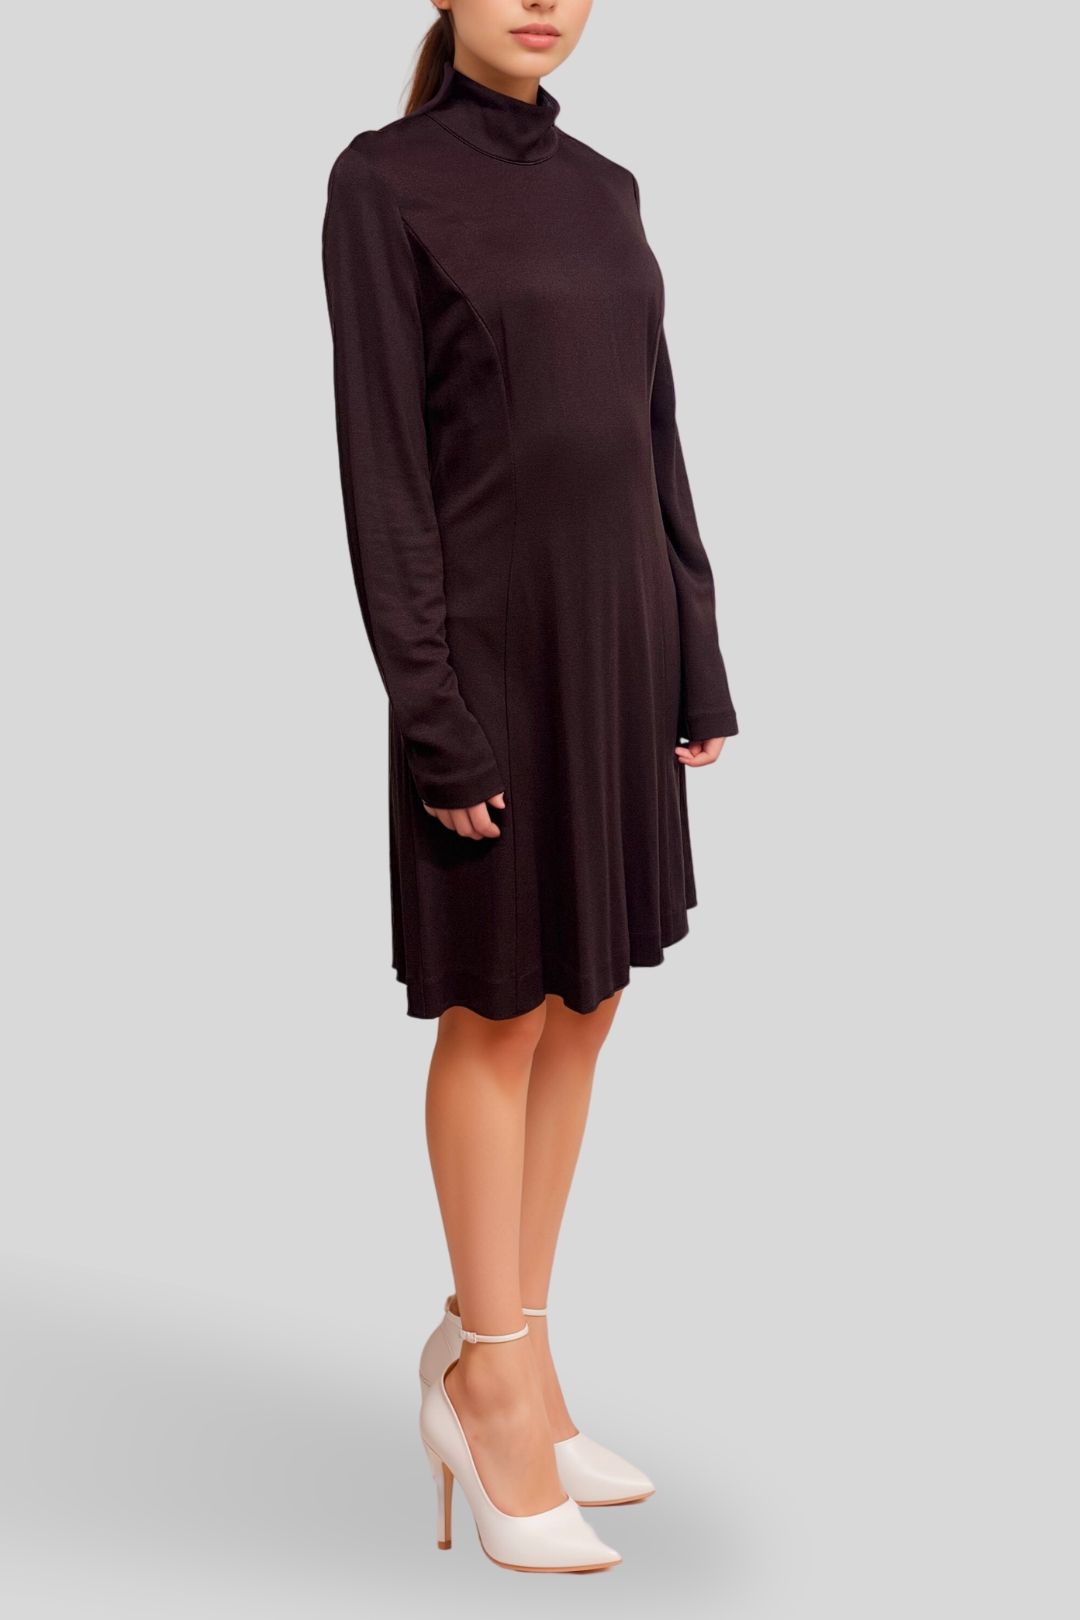 Dress Hire Casual Cue - Long Sleeve Turtle Neck Dress